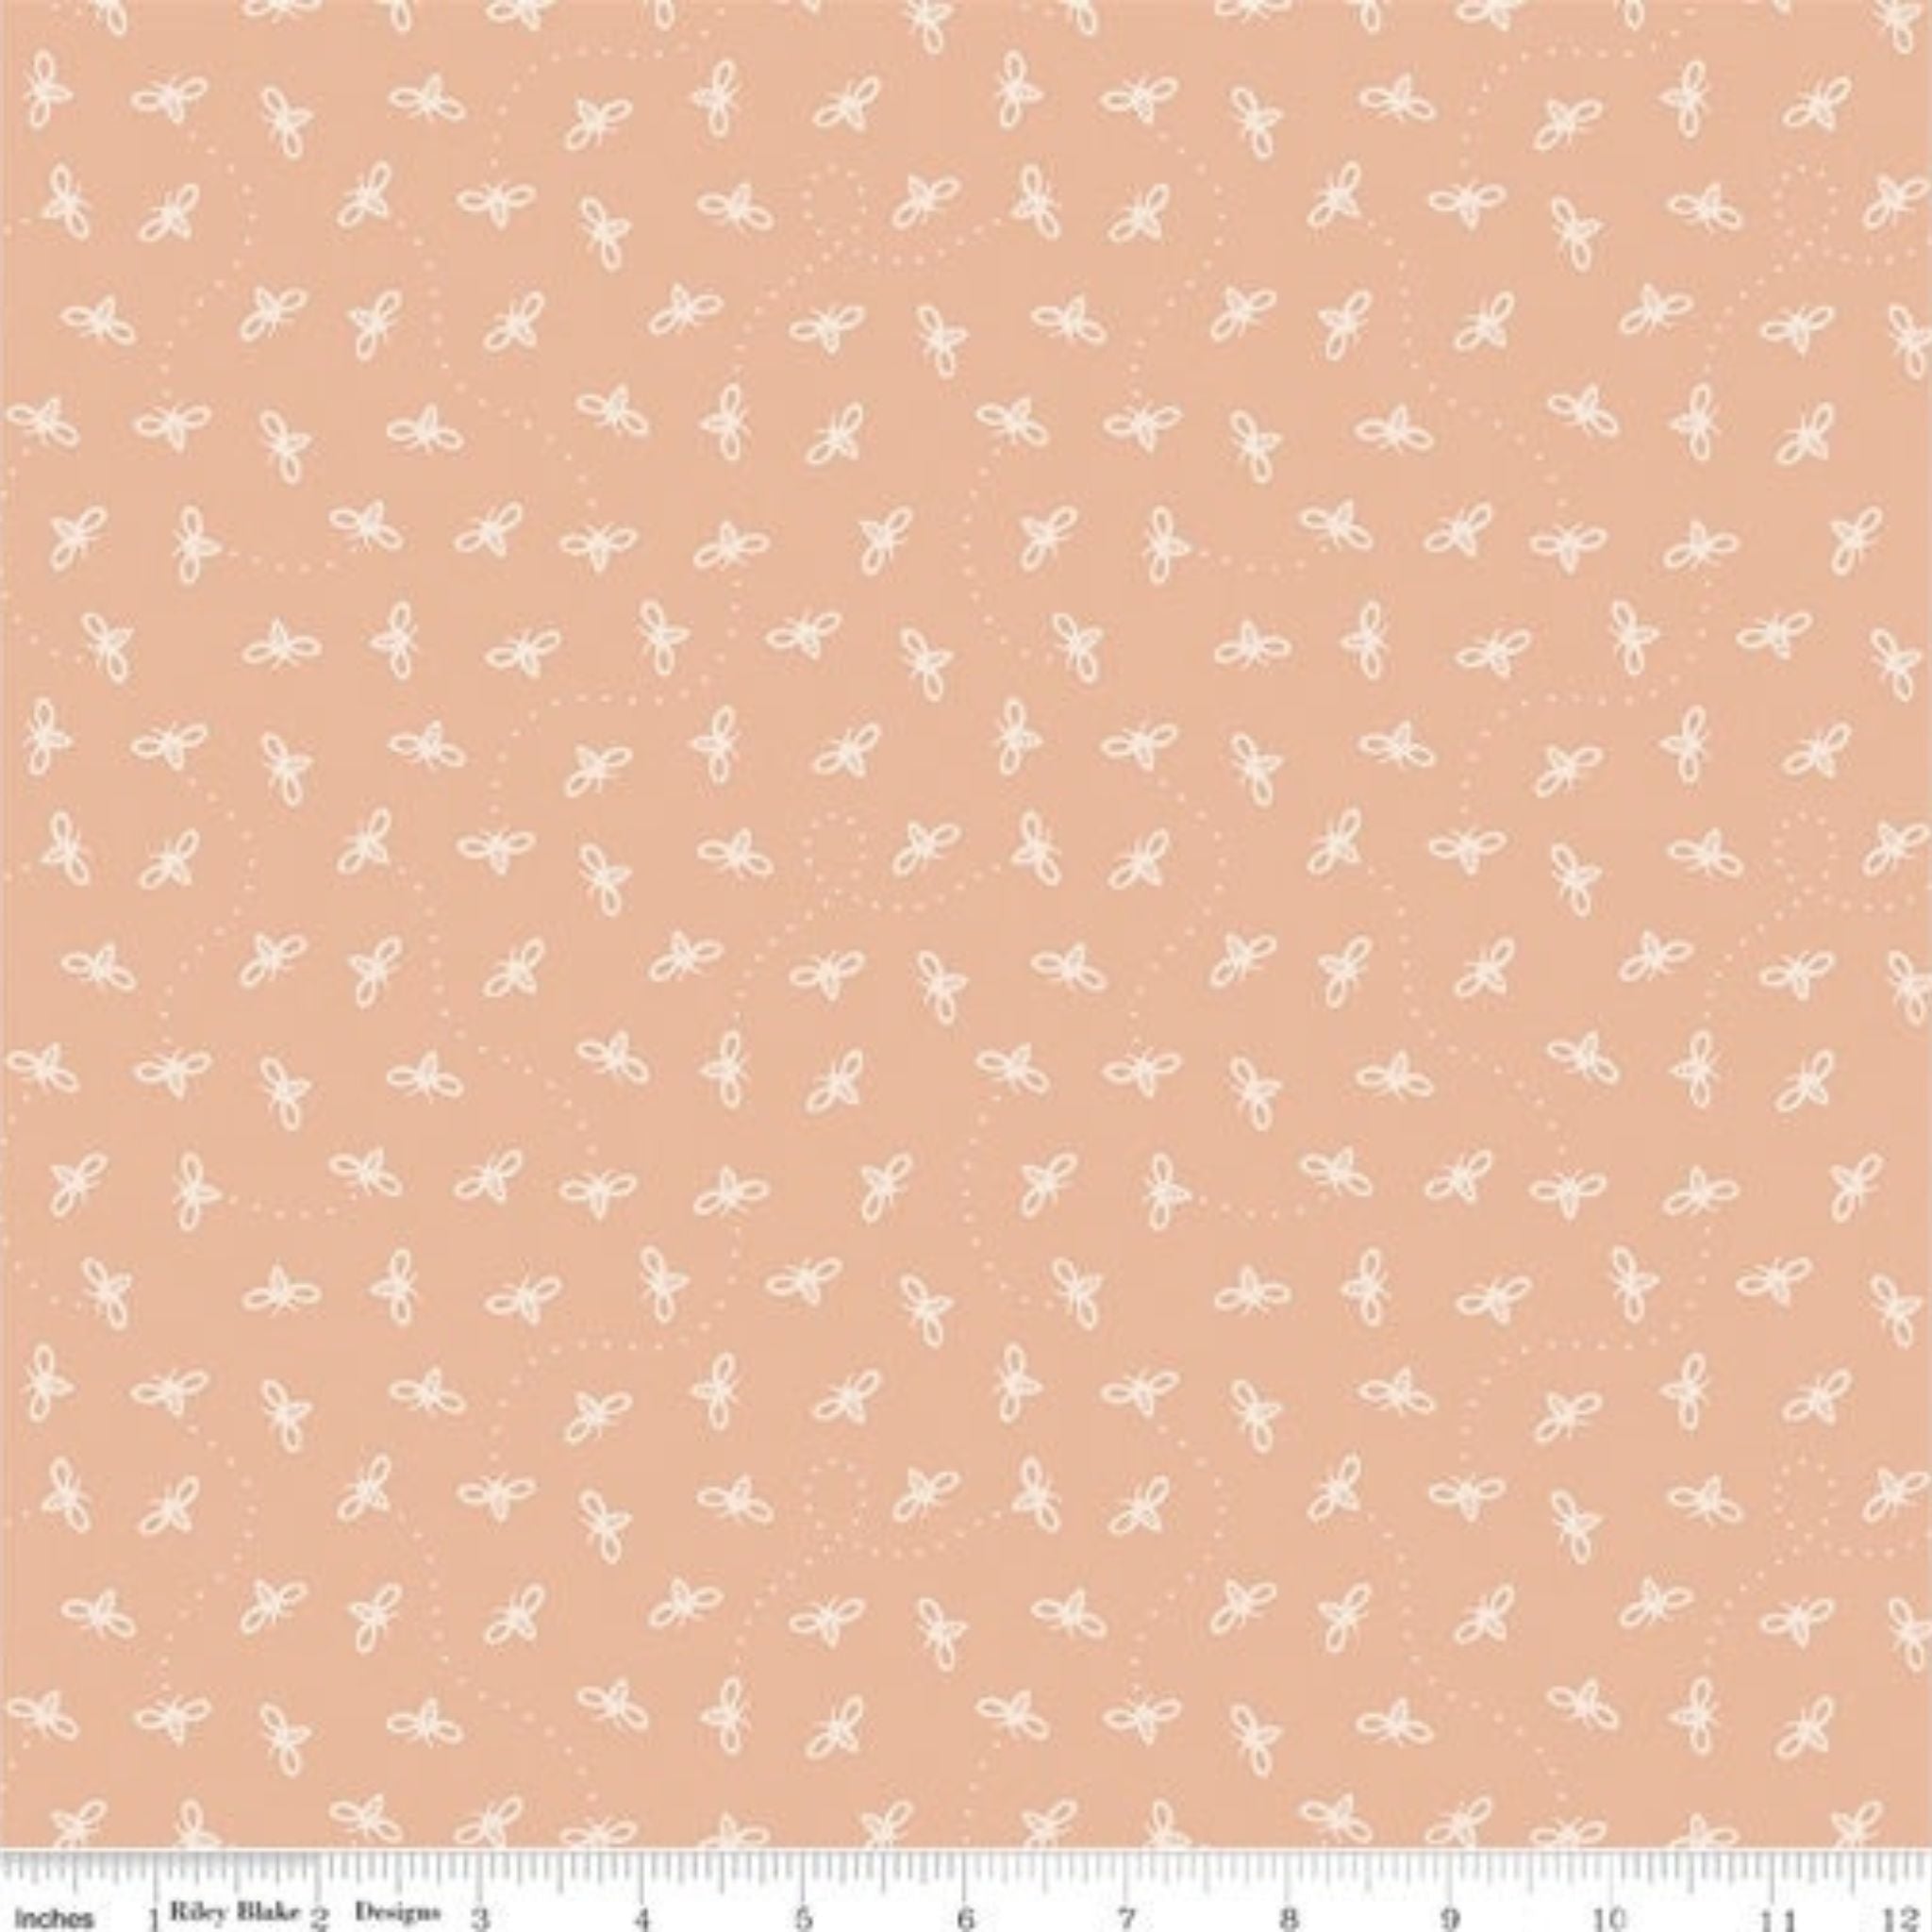 White silhouette bees on coral pink cotton fabric - Harmony by Riley Blake 